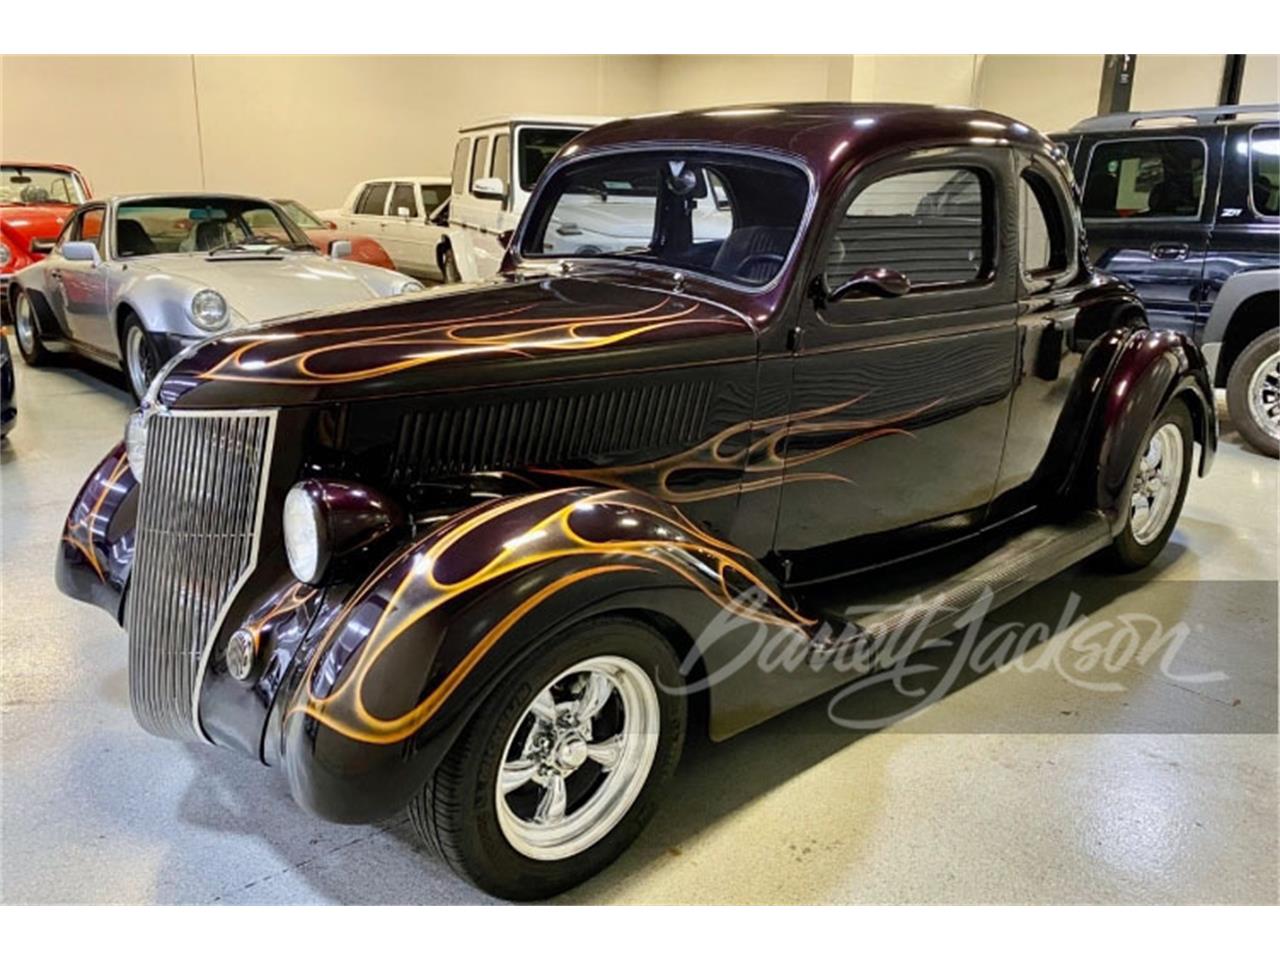 For Sale at Auction: 1936 Ford 5-Window Coupe in Scottsdale, Arizona for sale in Scottsdale, AZ